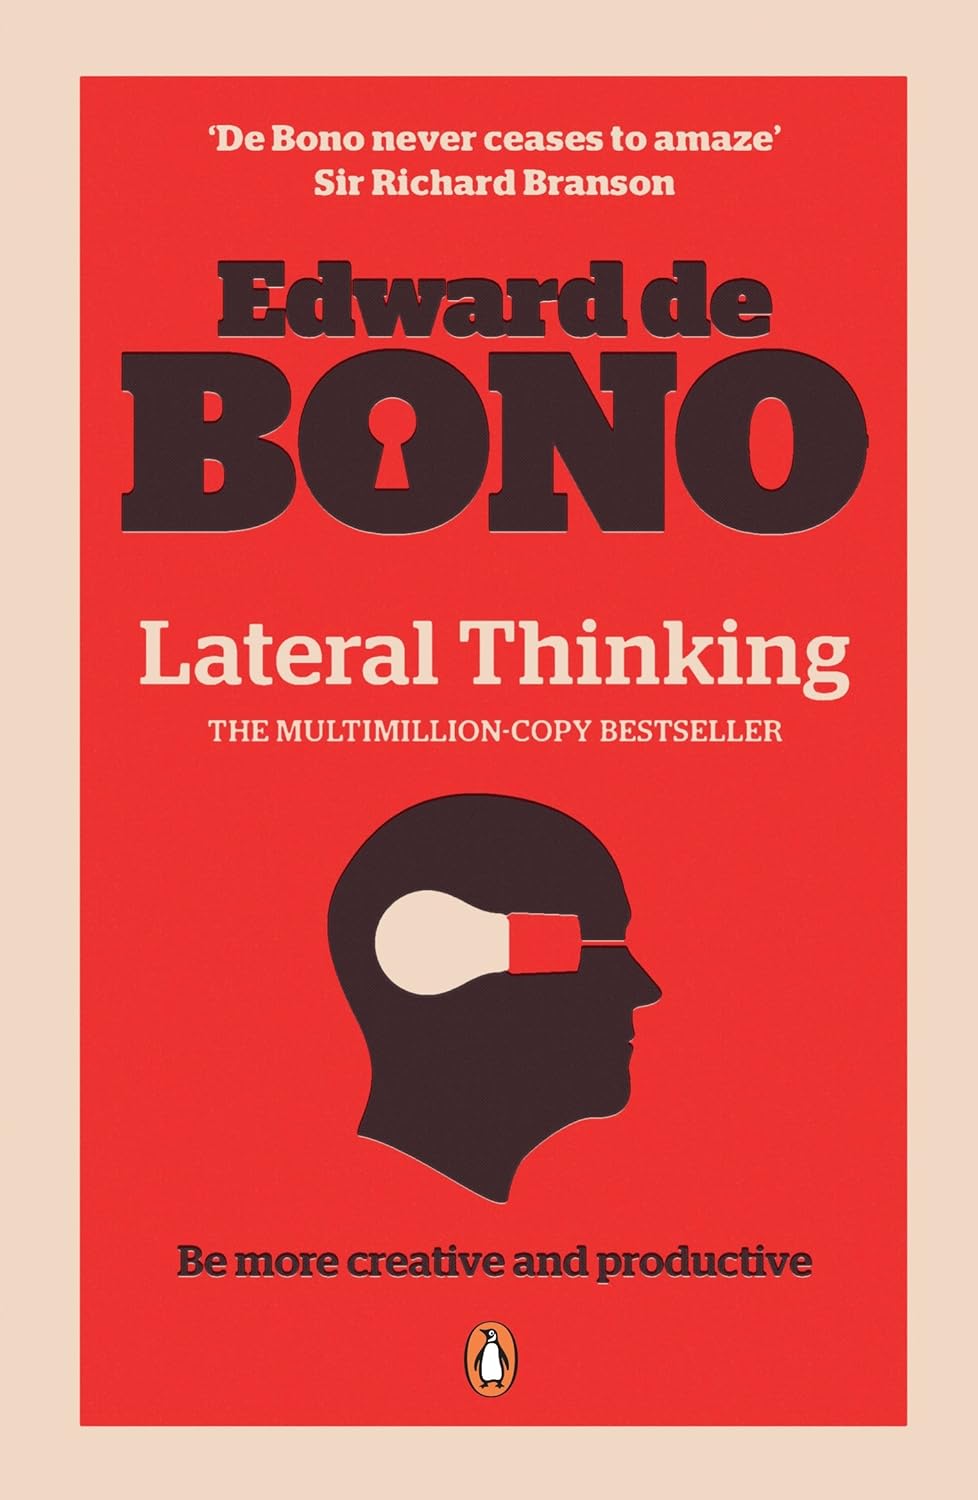 Lateral thinking : a textbook of creativity : be more creative and productive